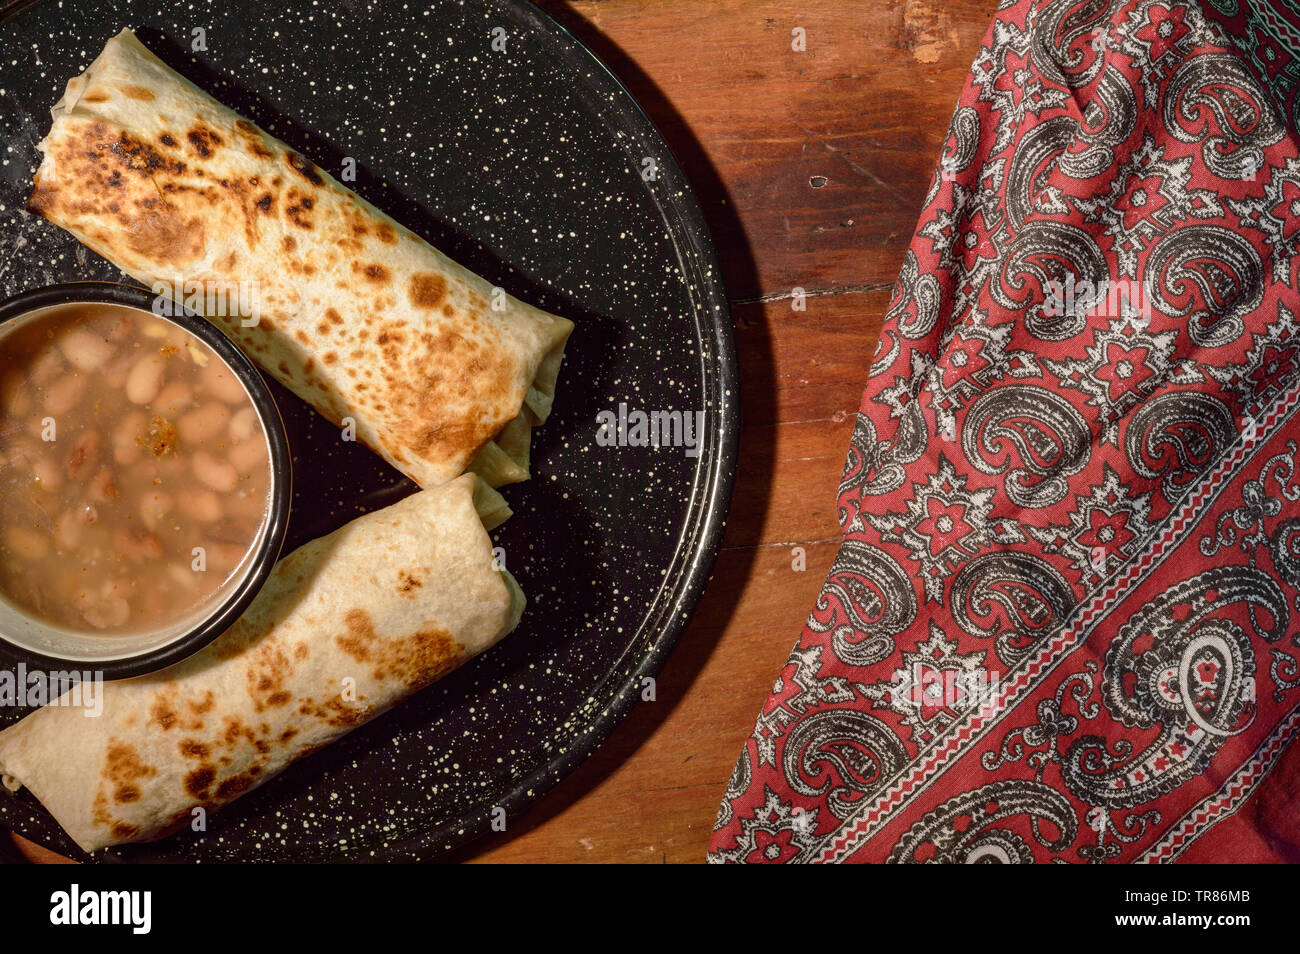 Mexican norteño breakfast, burritos of Sonoran machaca with eggs and beans. Concept for Mexican food, restaurants, food blogs, fast food, comfort food Stock Photo